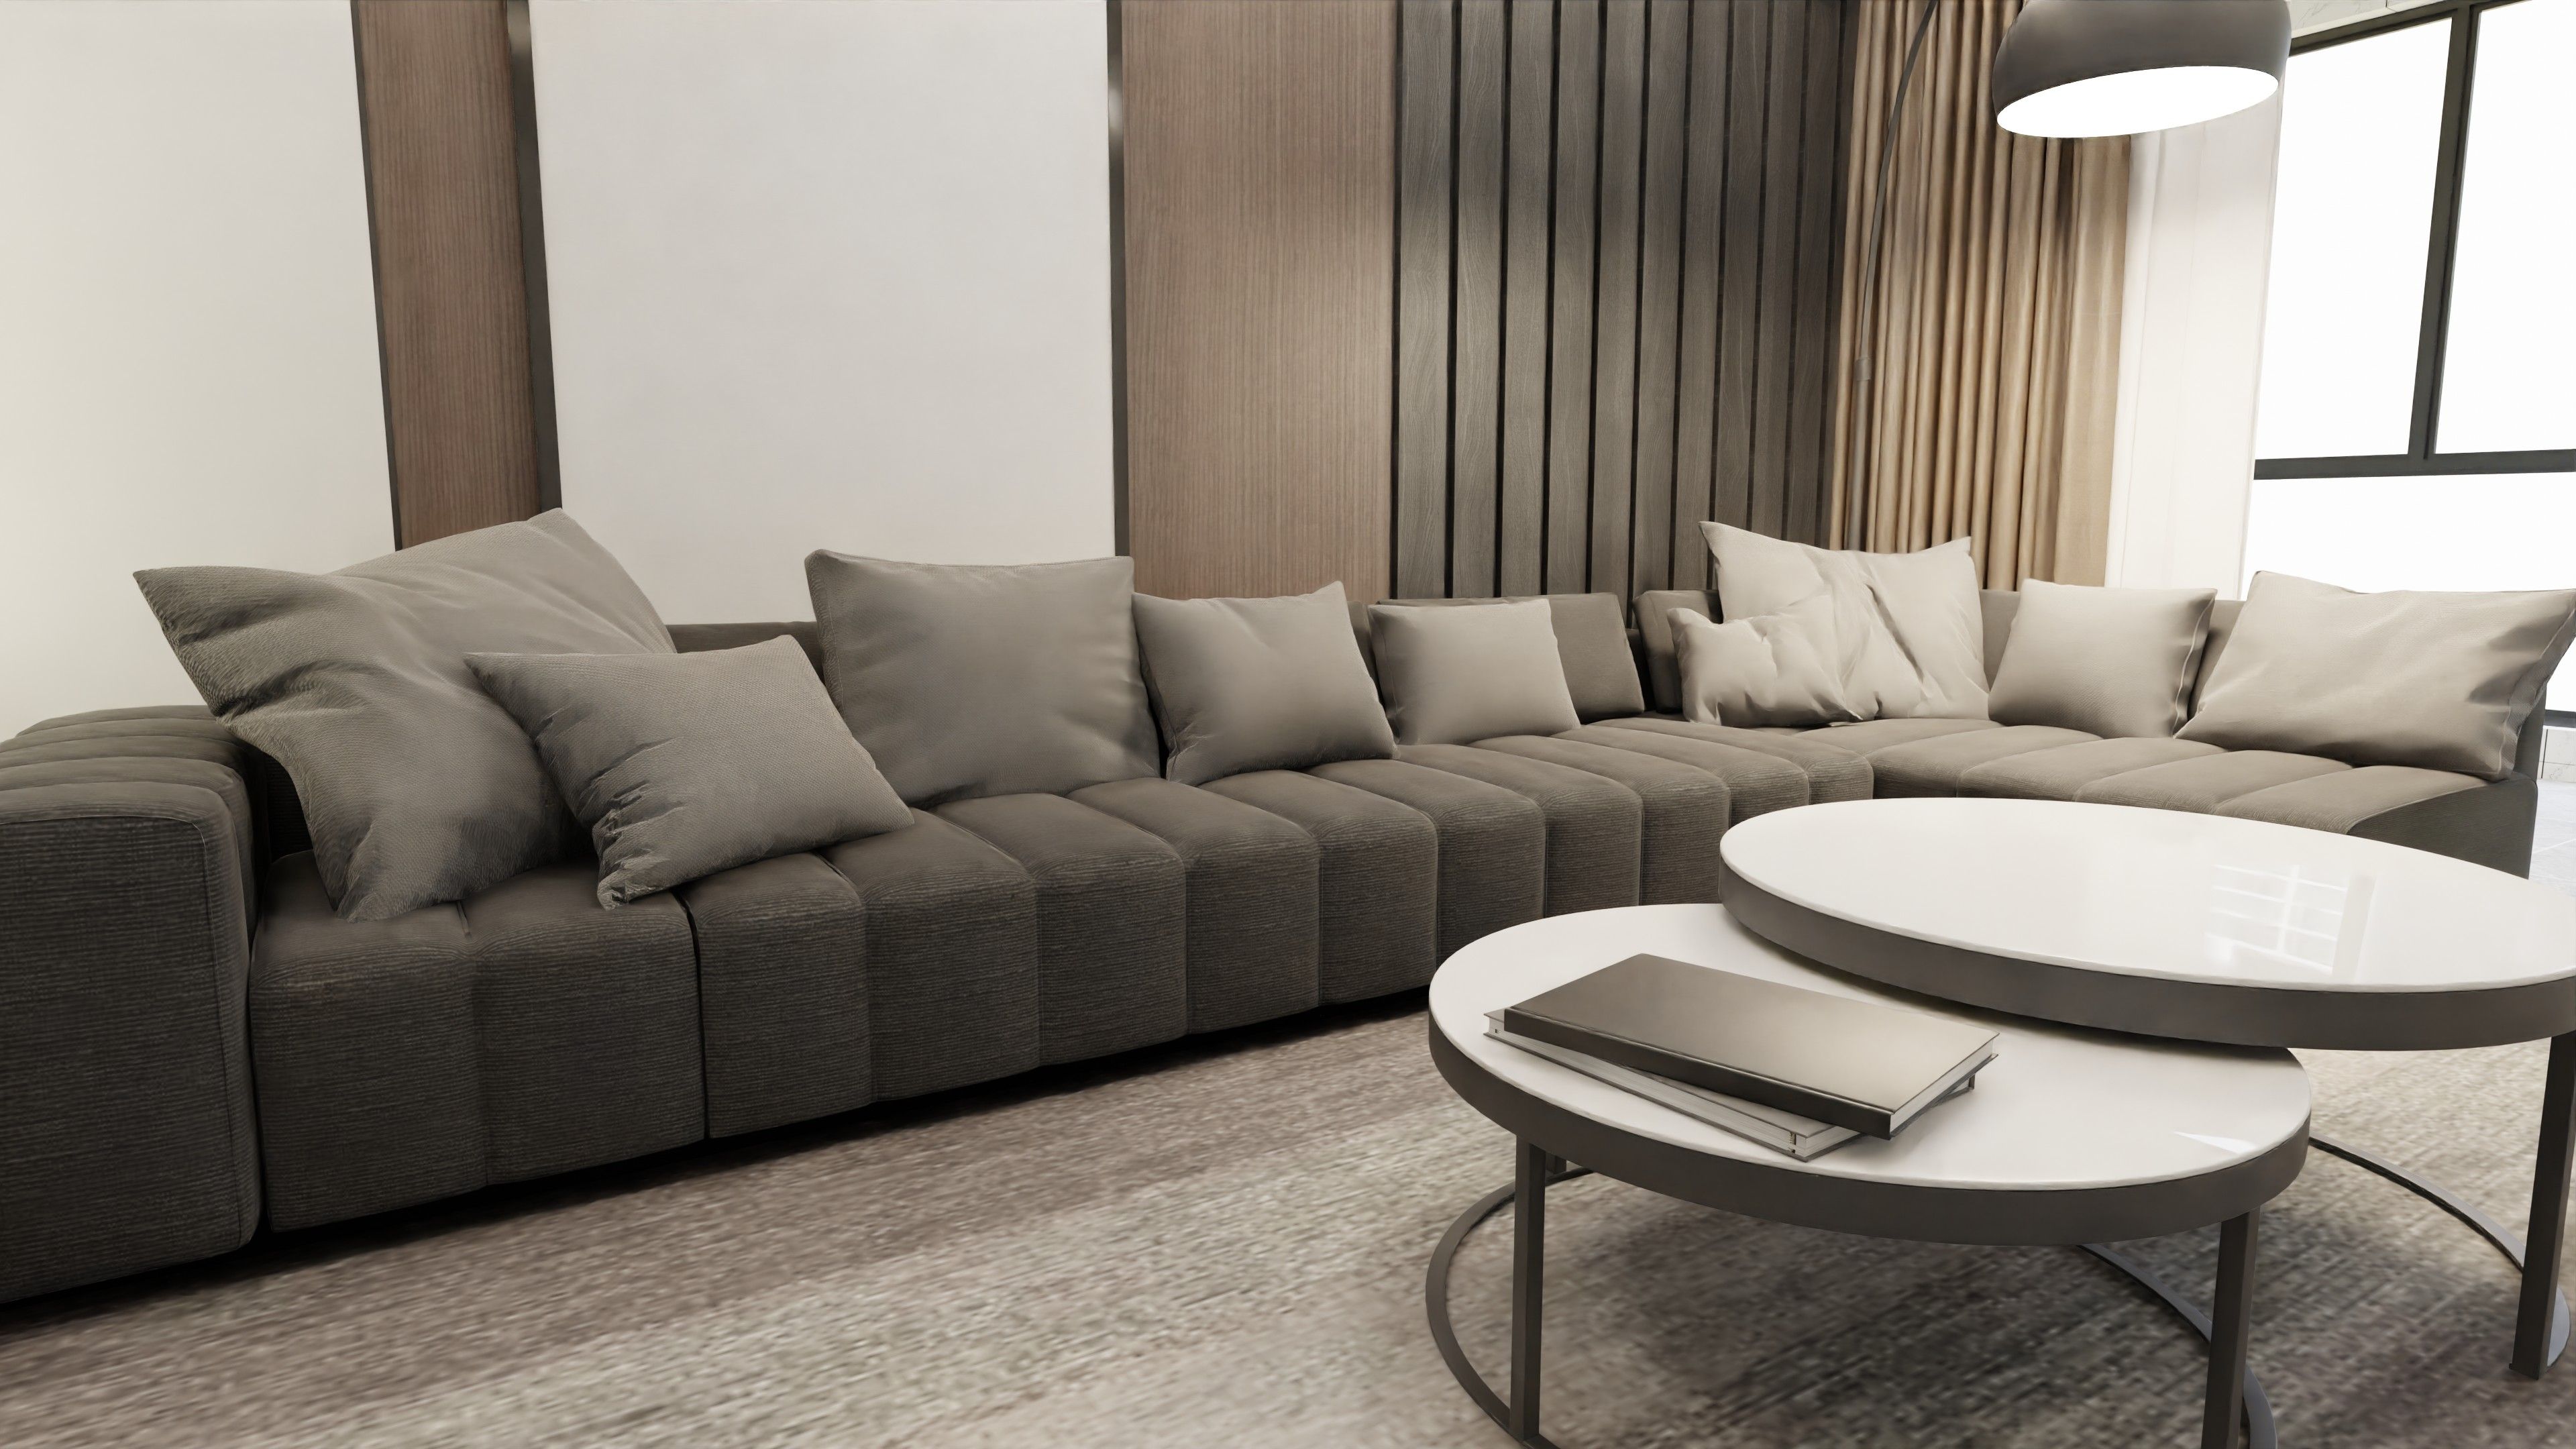 Minotti Sofas Up To 80 Off At